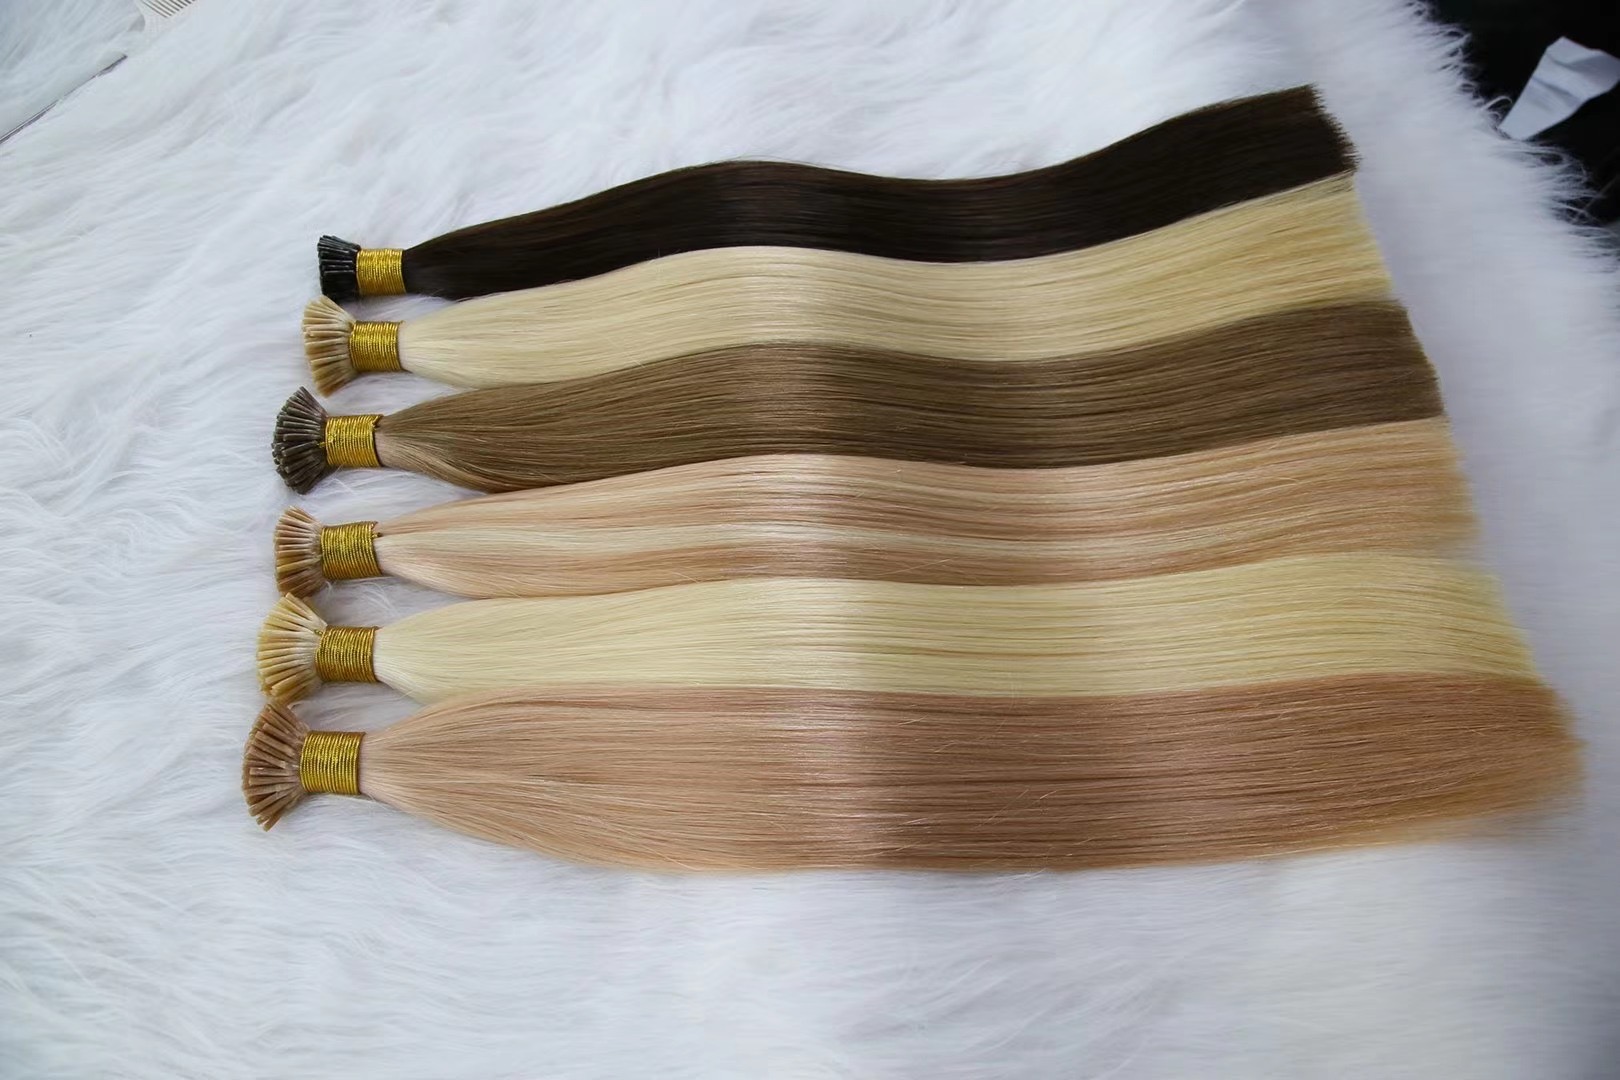 factory price italy glue i-tip hair extensions QM276